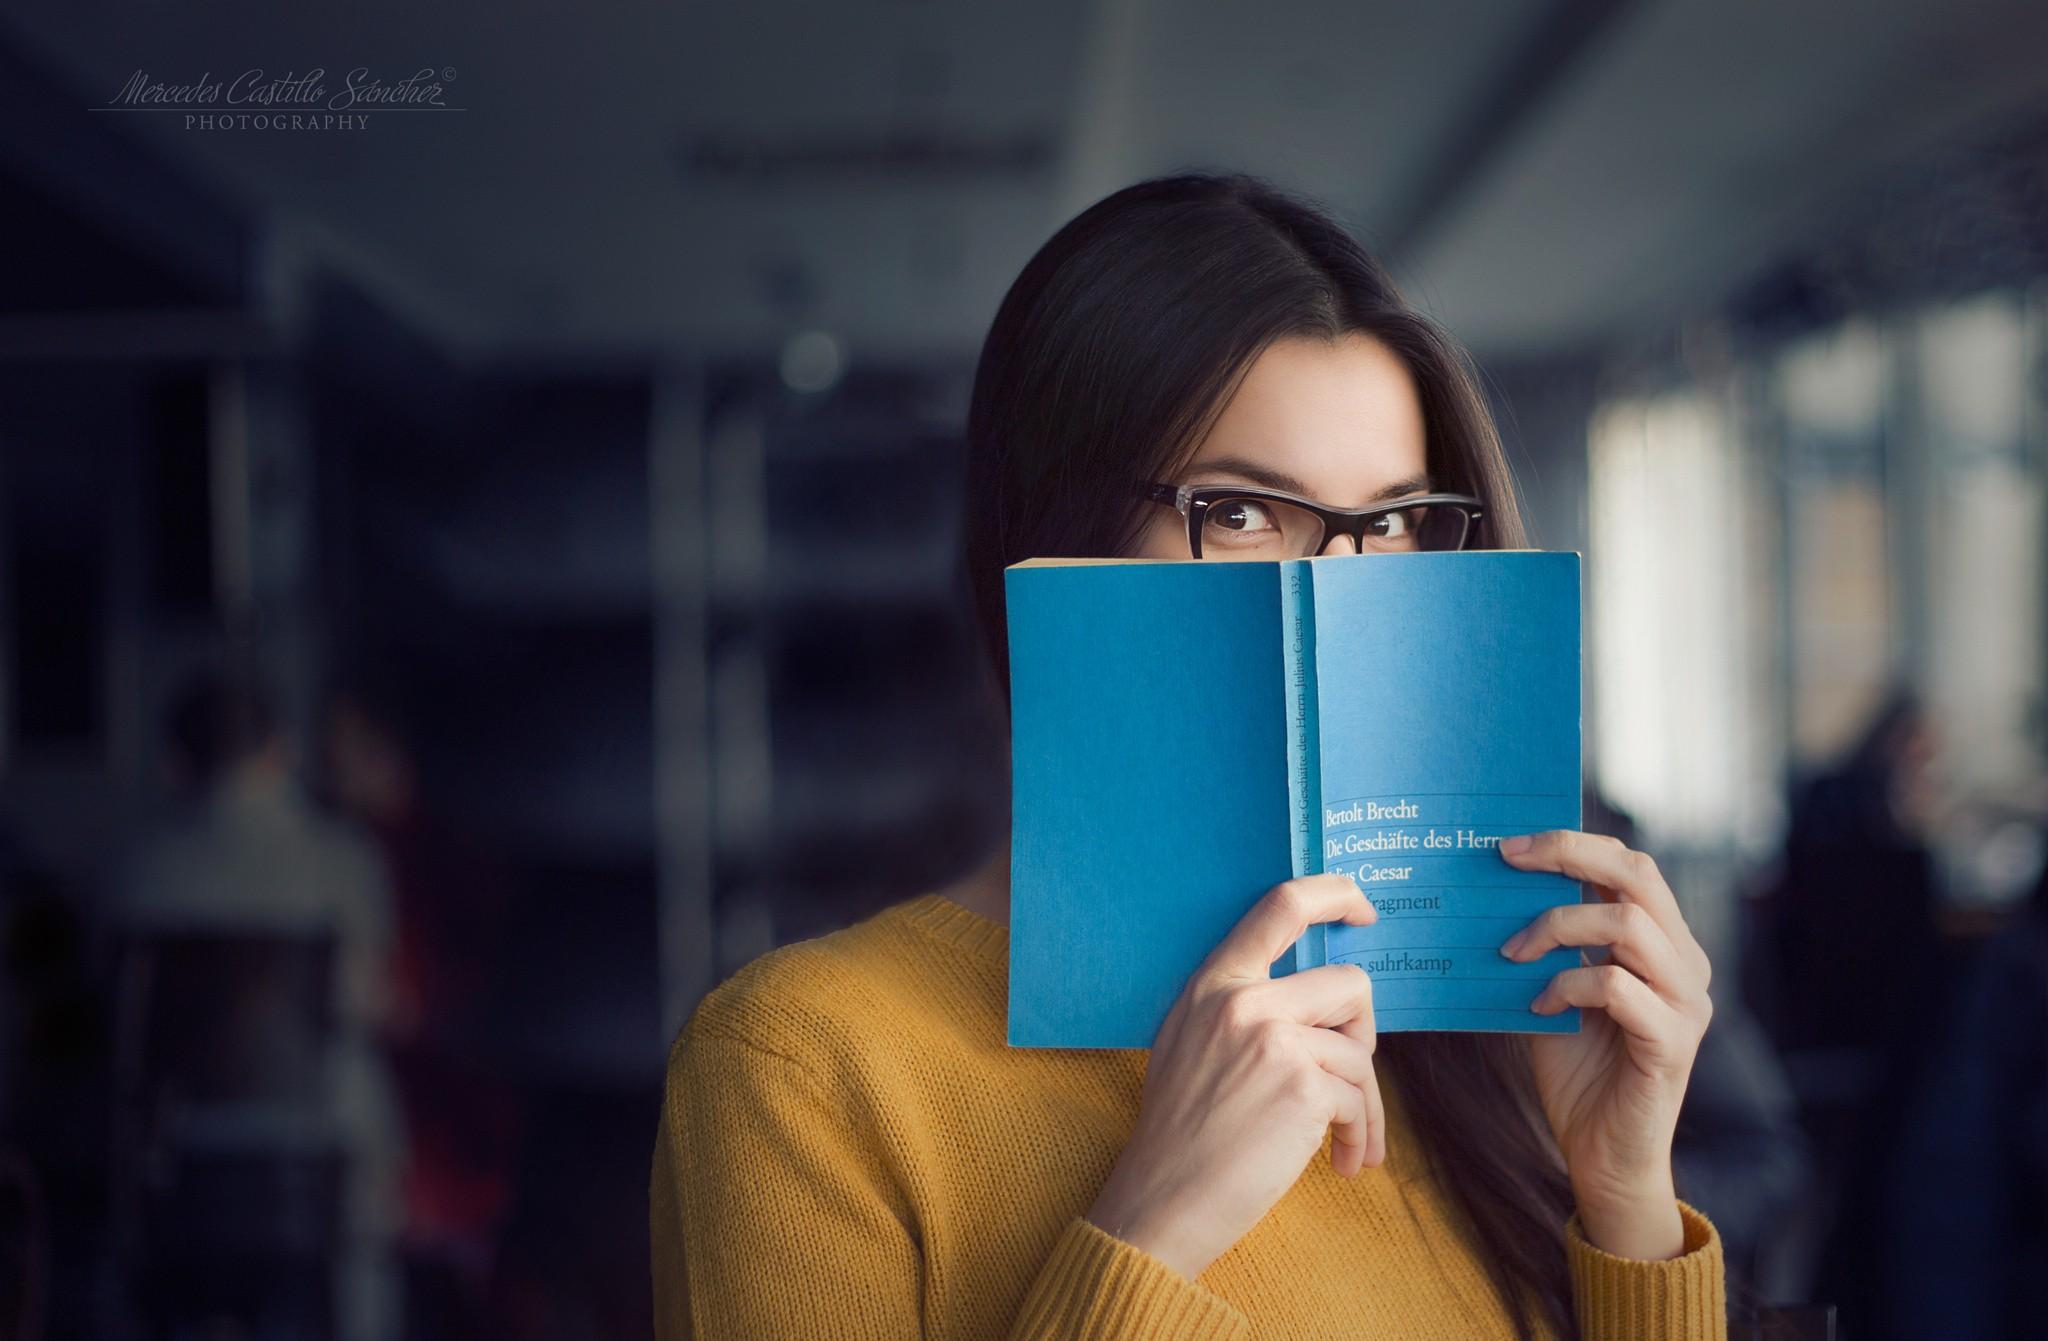 women, Women With Glasses, Books, Library, Glasses